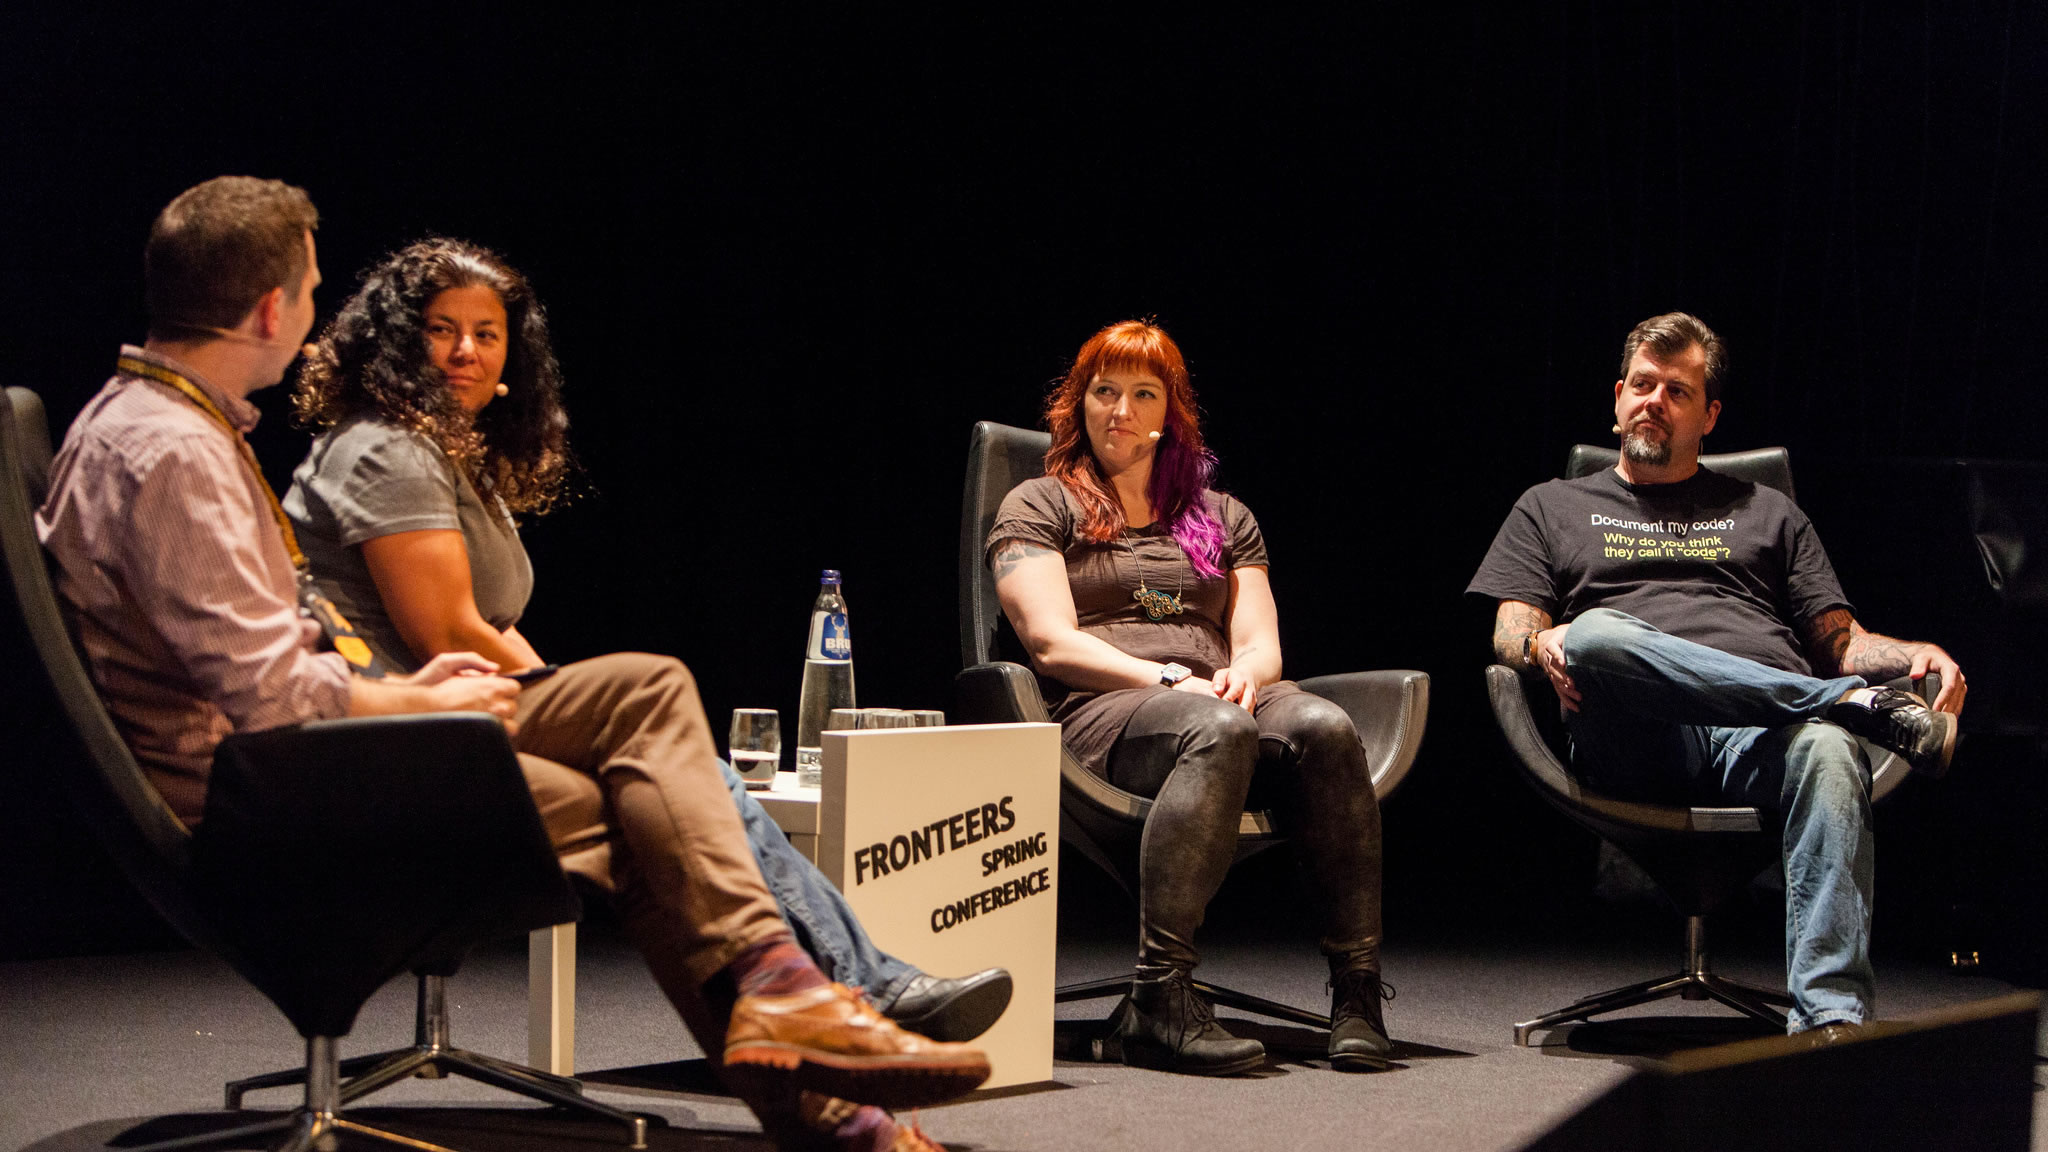 Panel discussion about Accessible Performance - Hawksworth, Weyl, Sutton, Groves. Photo by Peter Peerdeman